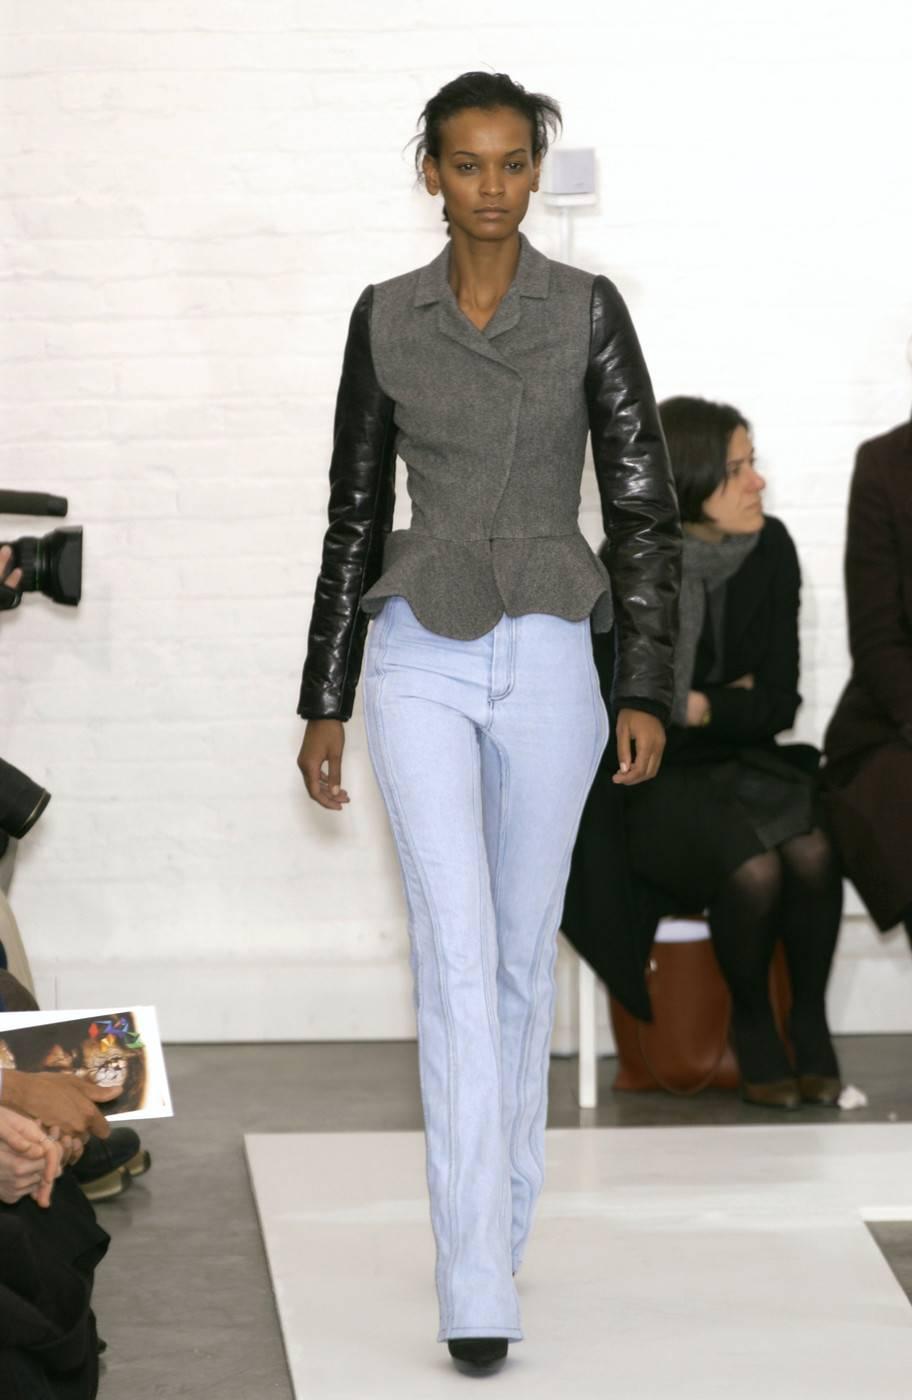 Women's new 2002 Nicolas Ghesquiere for BALENCIAGA wool & leather runway jacket 